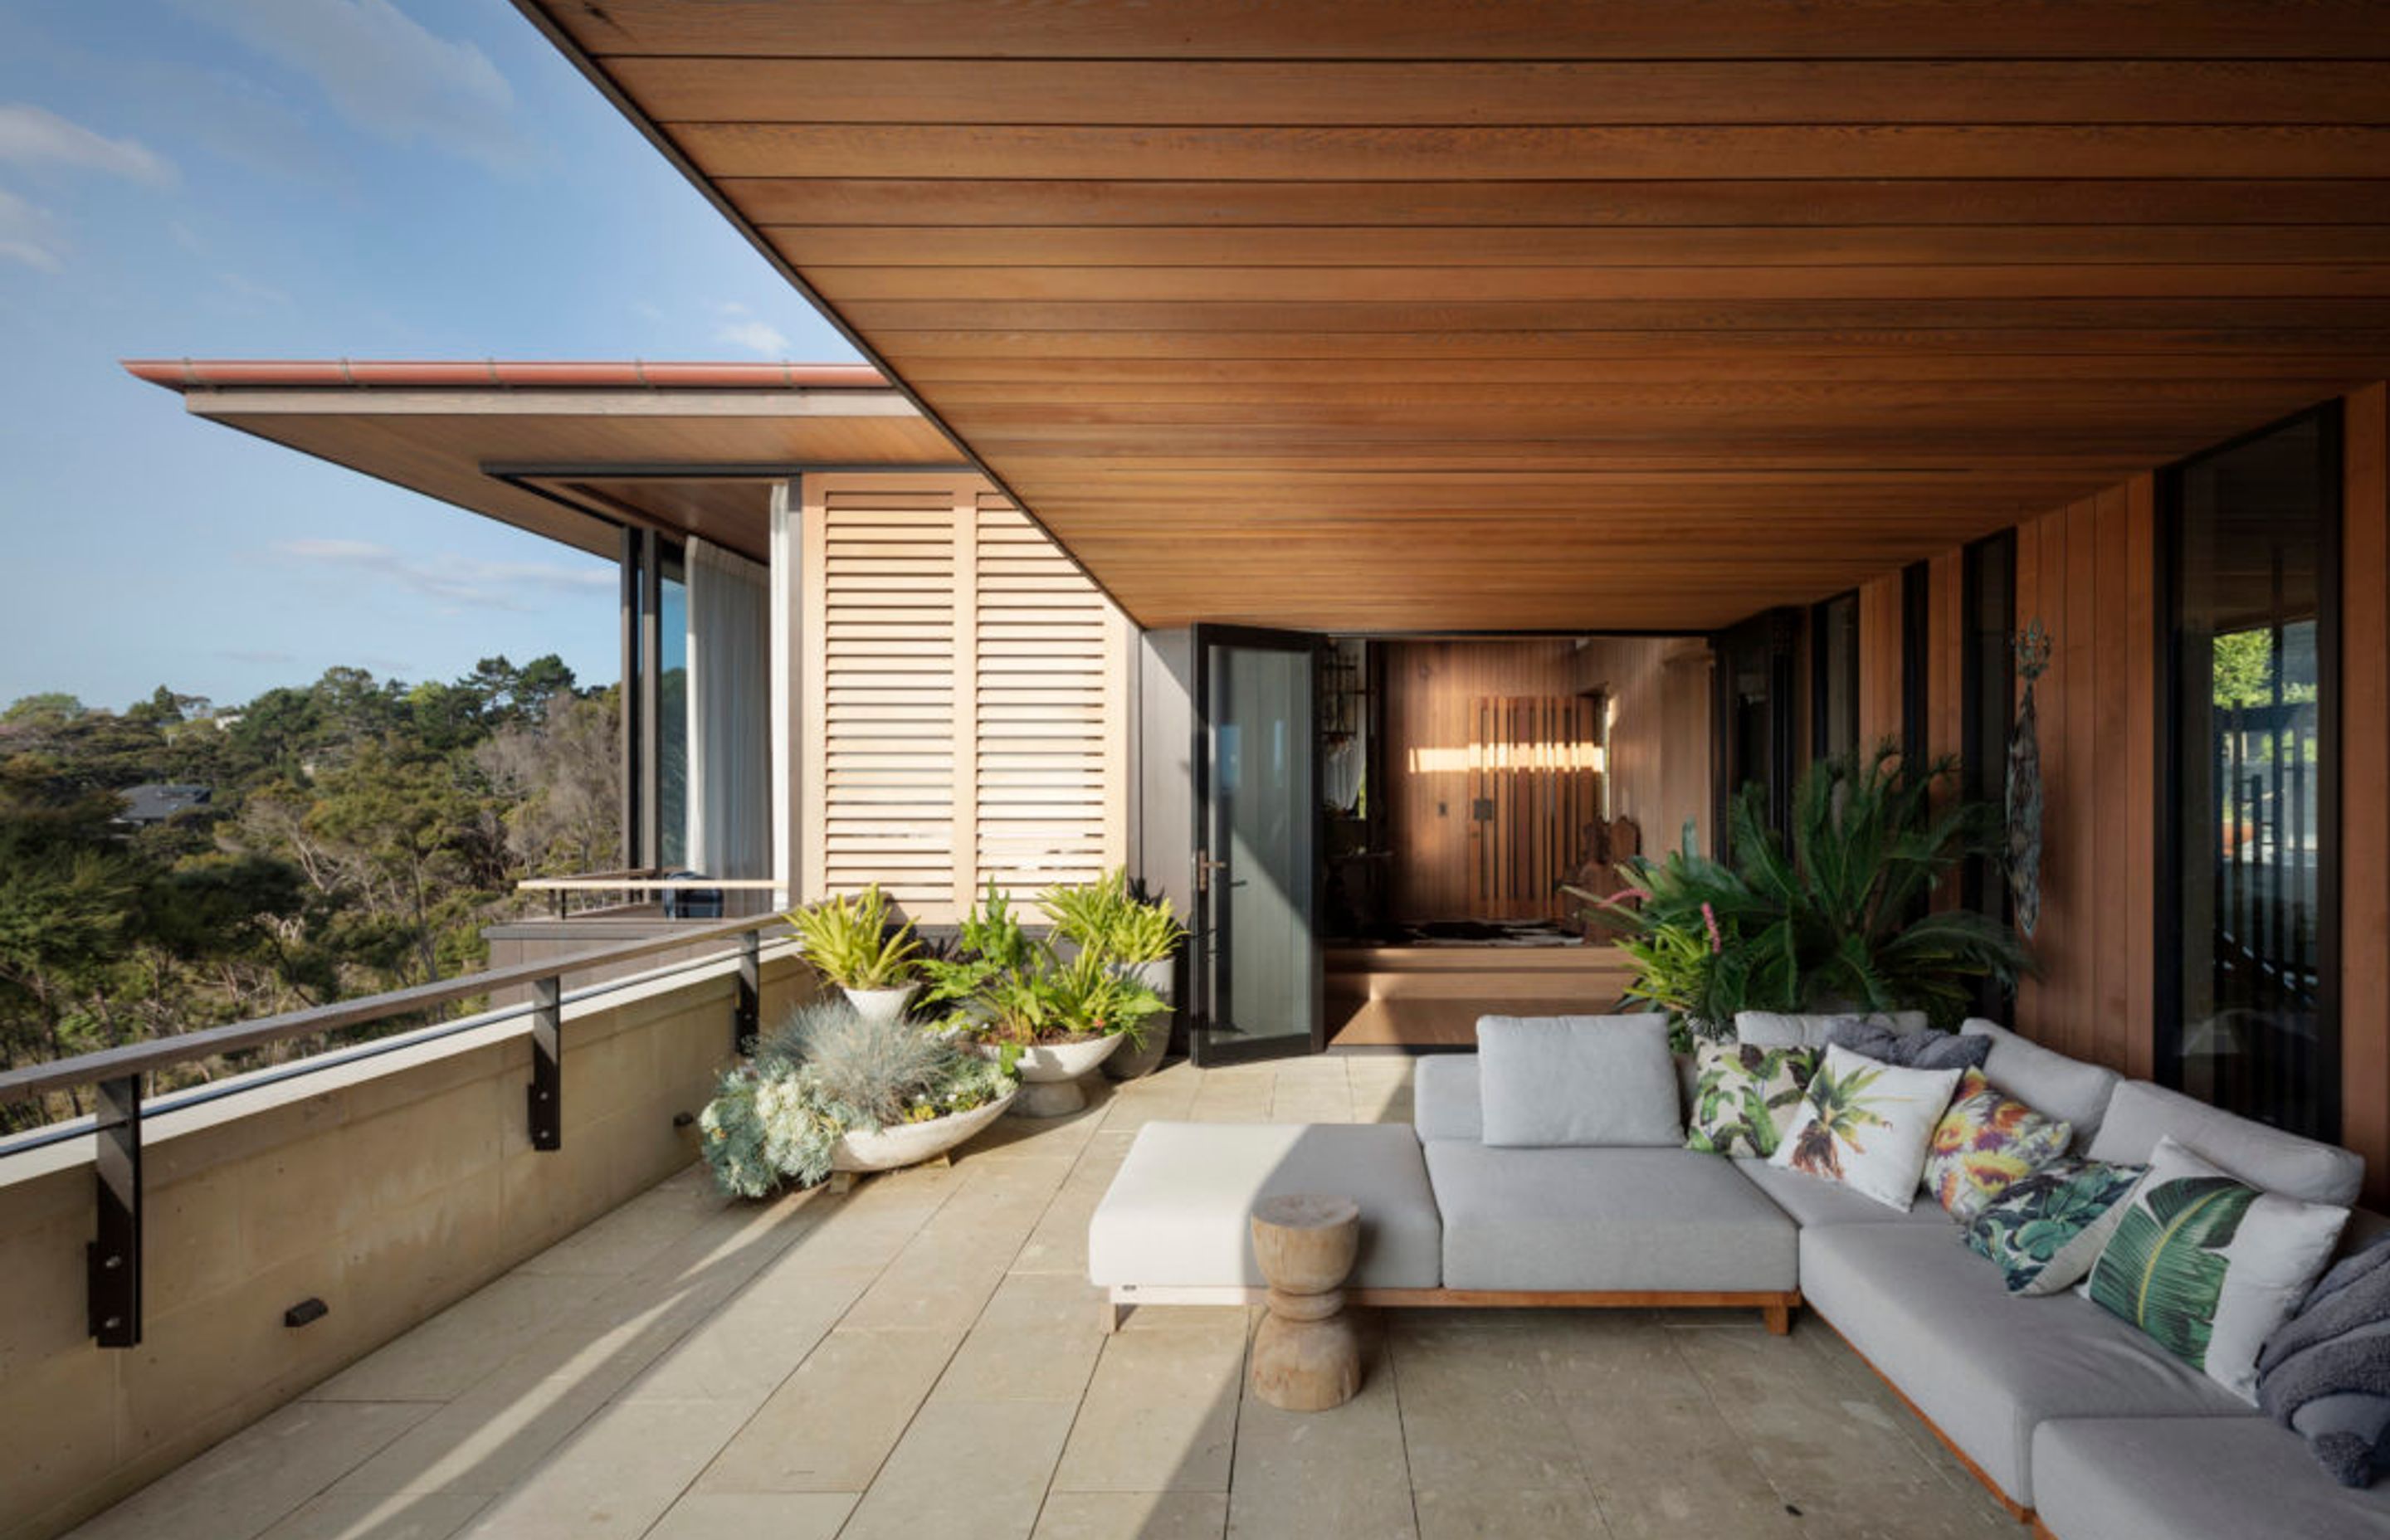 The terrace on the upper floor creates an outdoor room with views to the sea, sheltered by a cedar soffit.